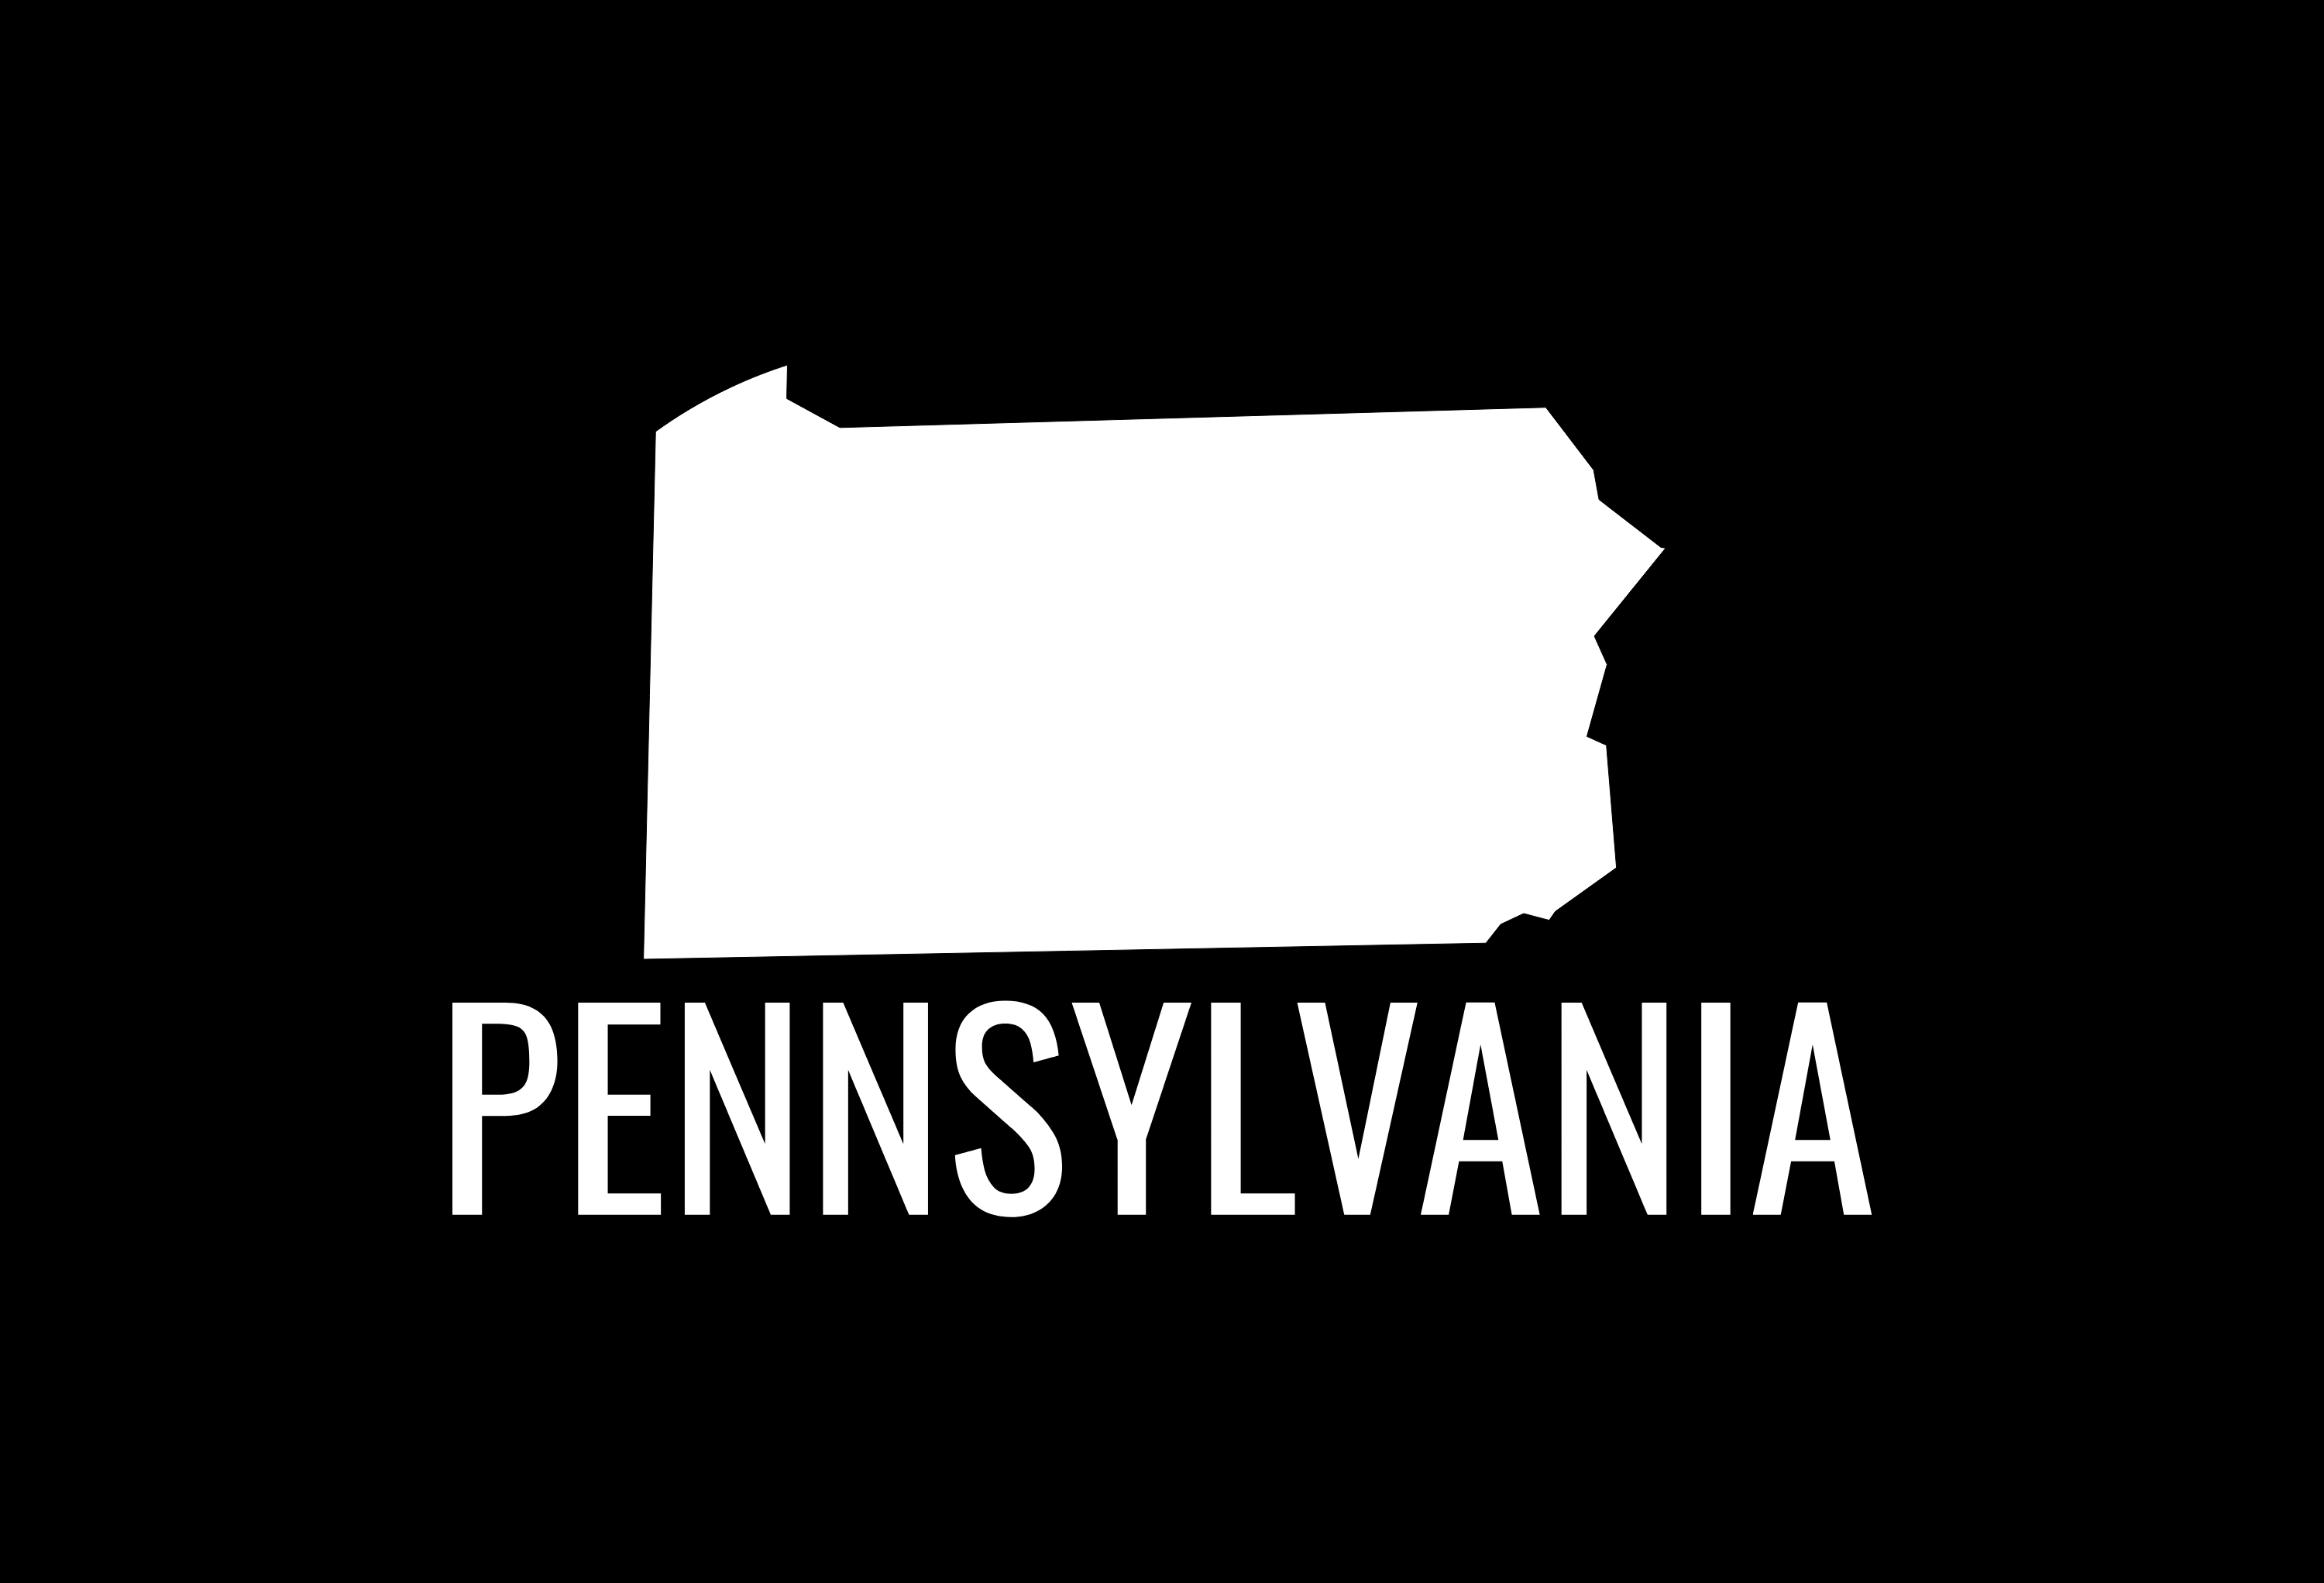 Pennsylvania State Map Car Decal - Permanent Vinyl Sticker for Cars, Vehicle, Doors, Windows, Laptop, and more!